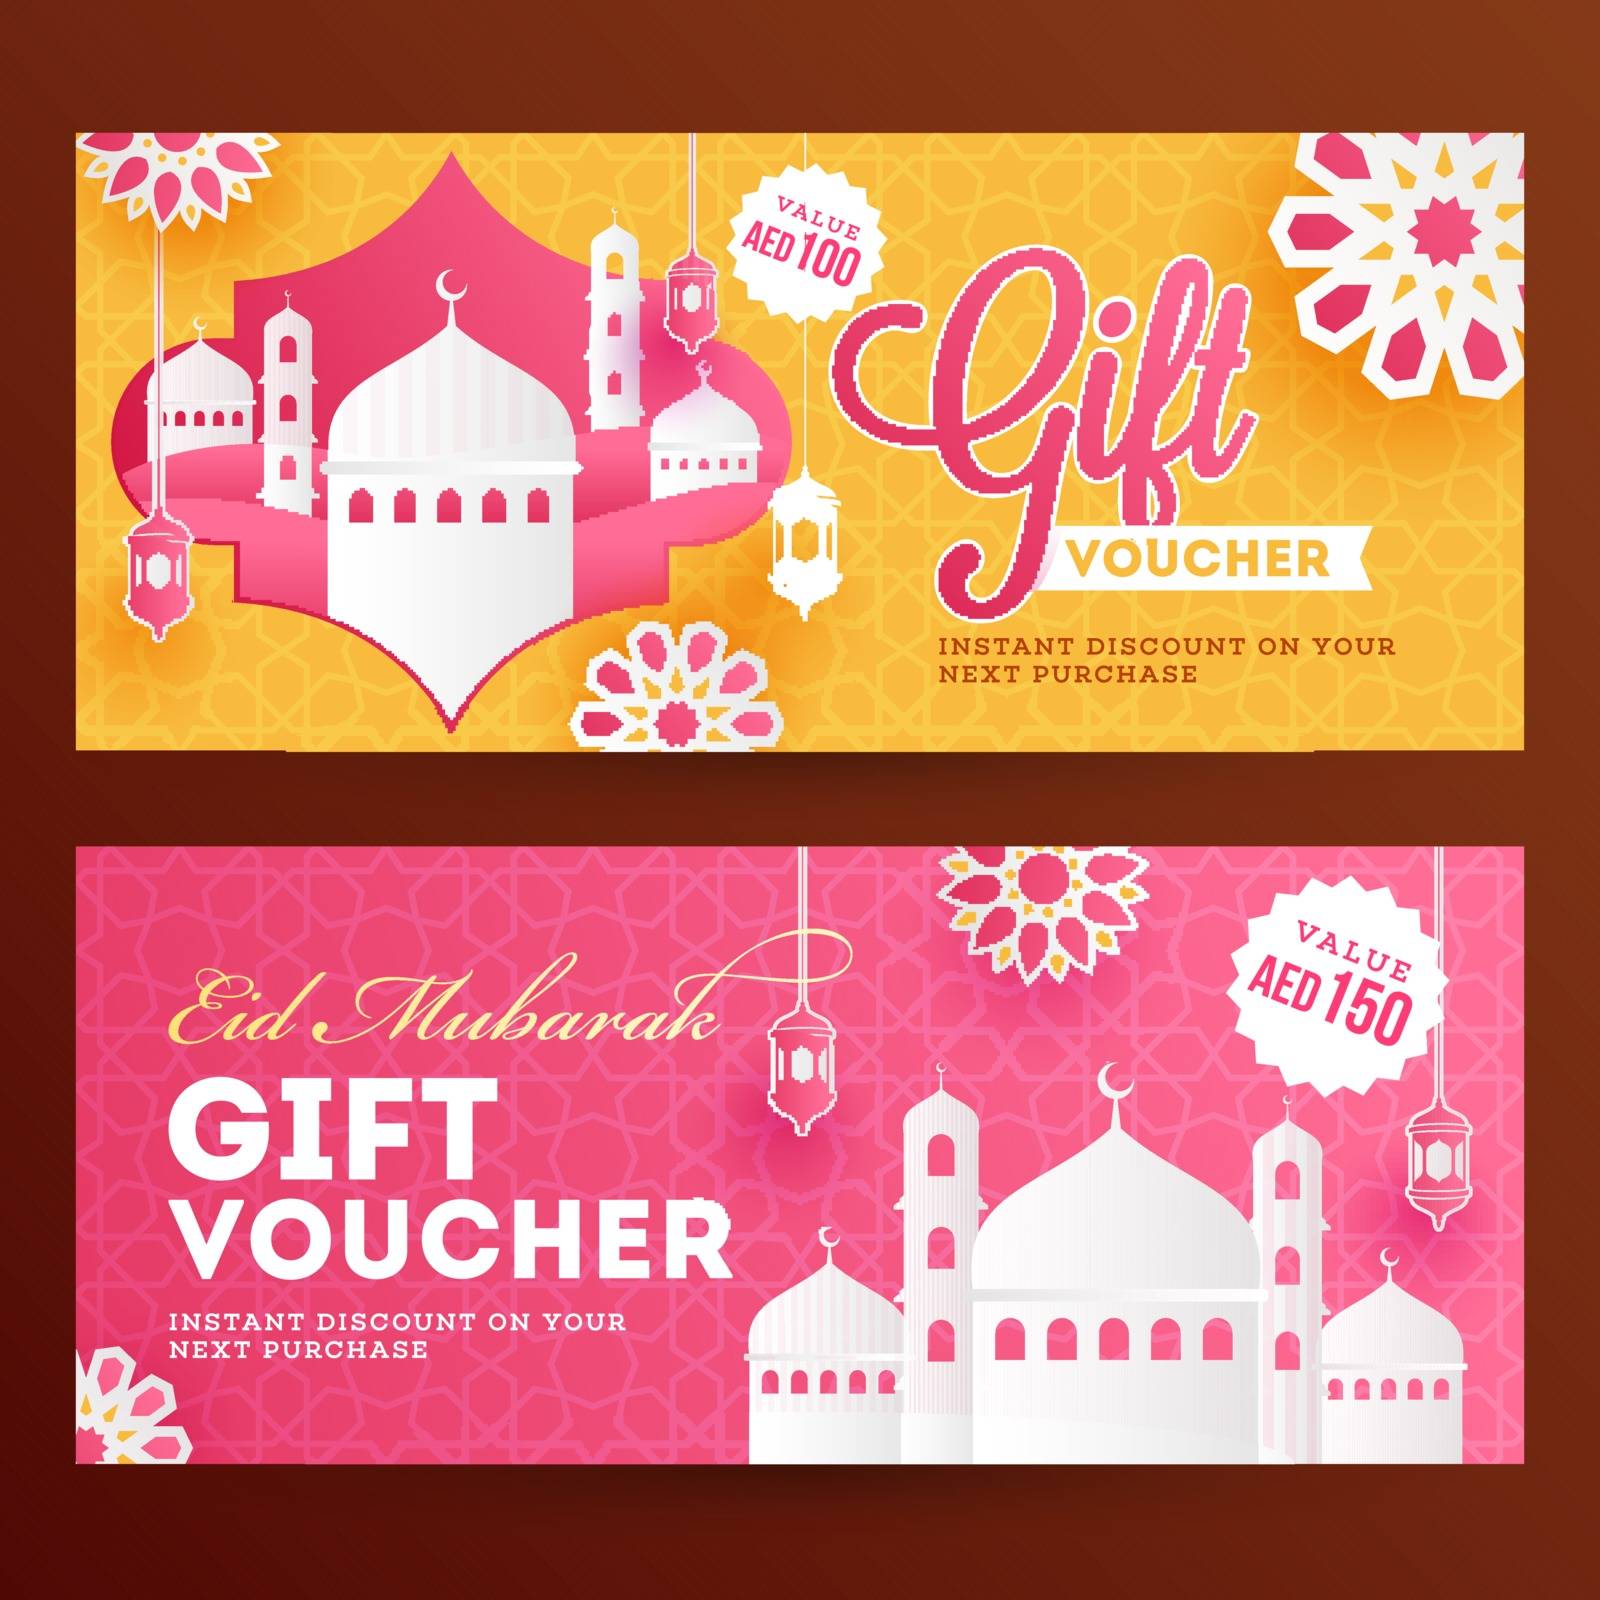 Eid Mubarak gift coupon or voucher front and back design in two by aispl